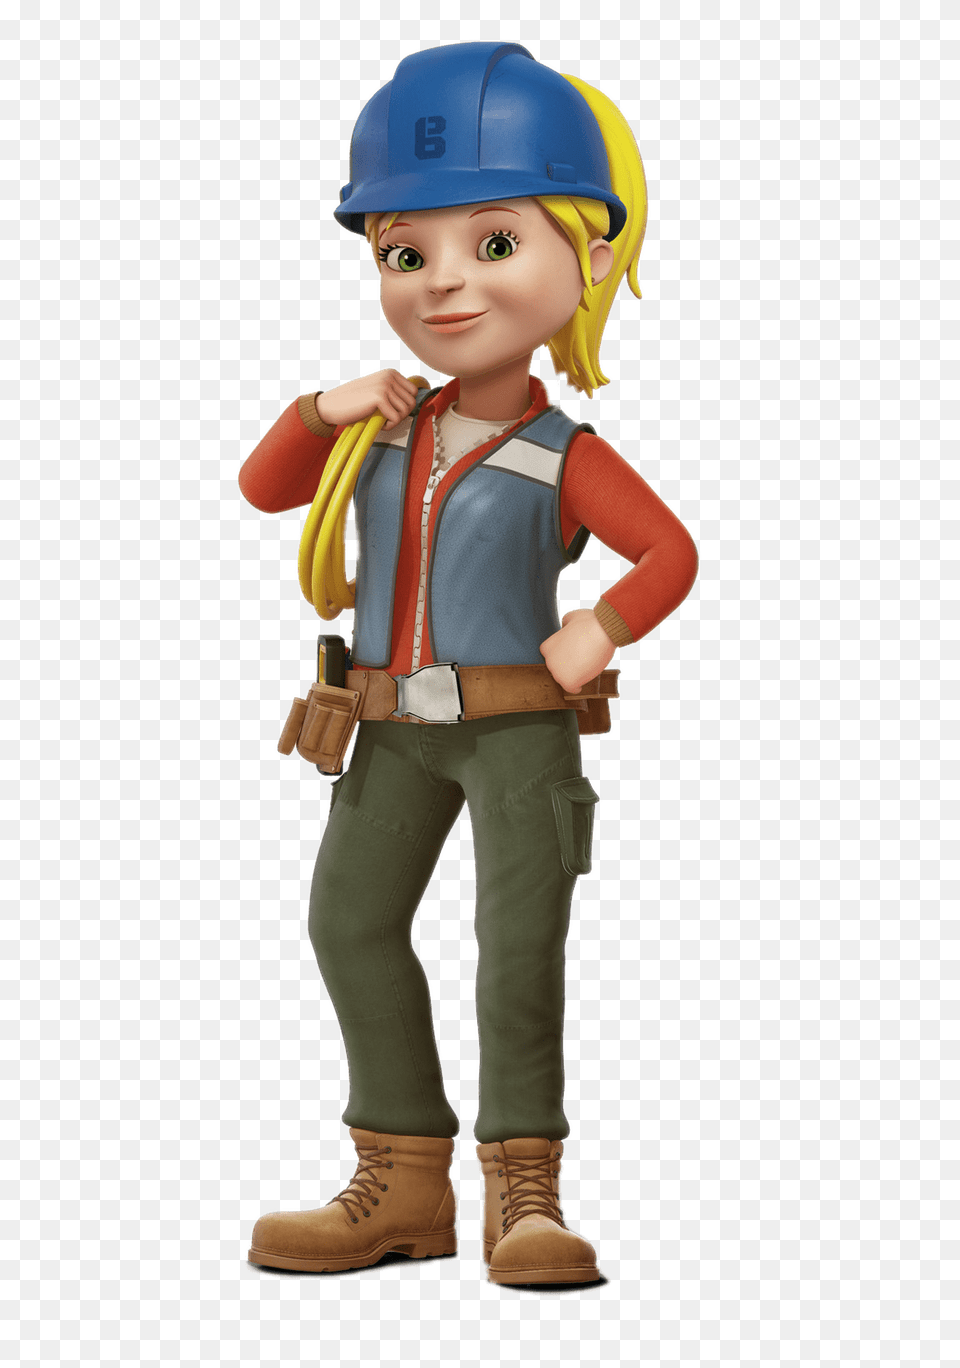 Wendy Ready For Work, Clothing, Hardhat, Helmet, Boy Png Image